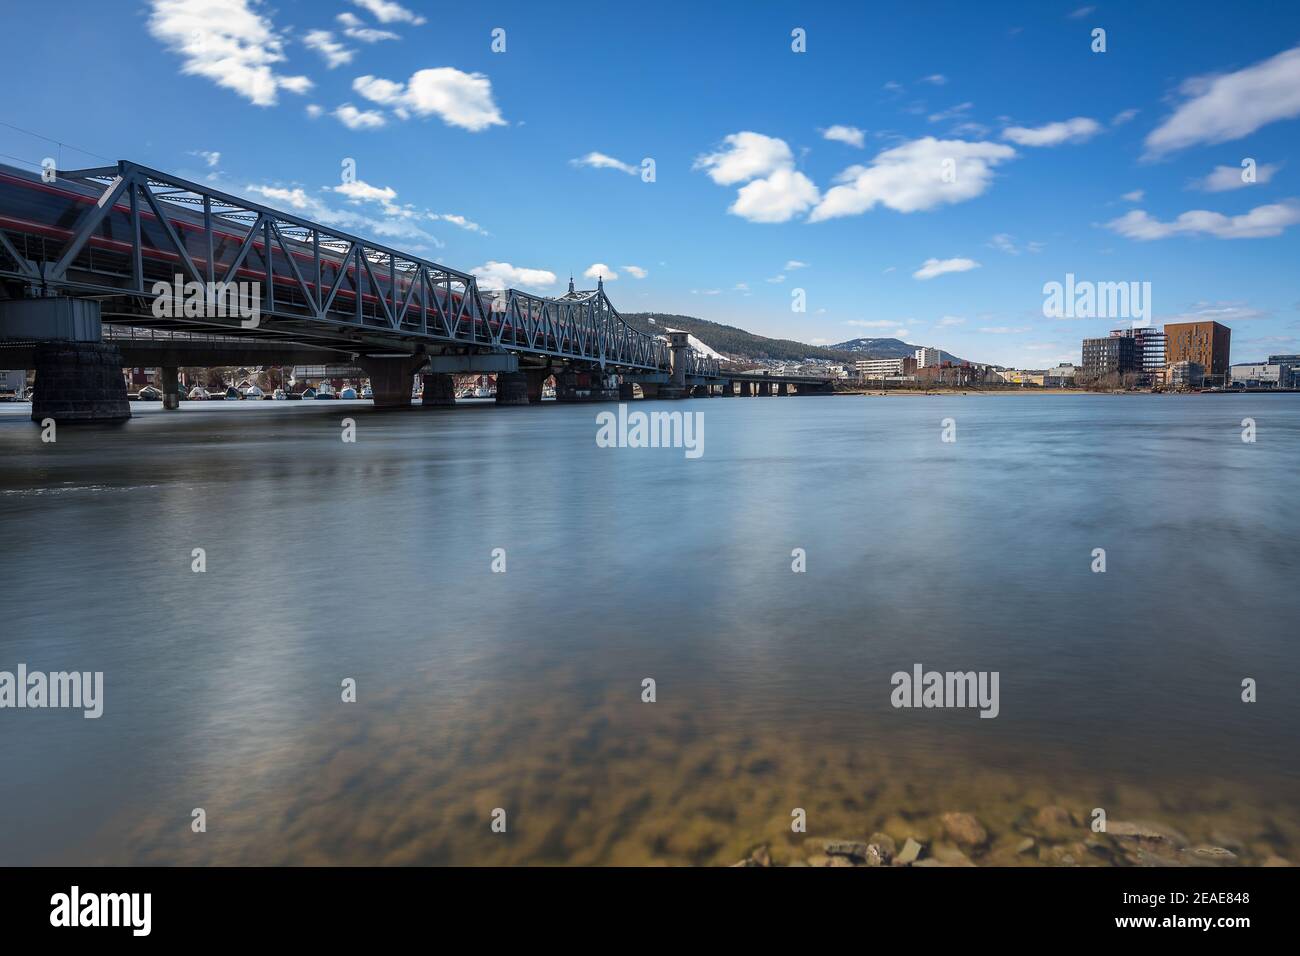 Railroad bridge in Drammen, Norway with a local train passing Stock Photo